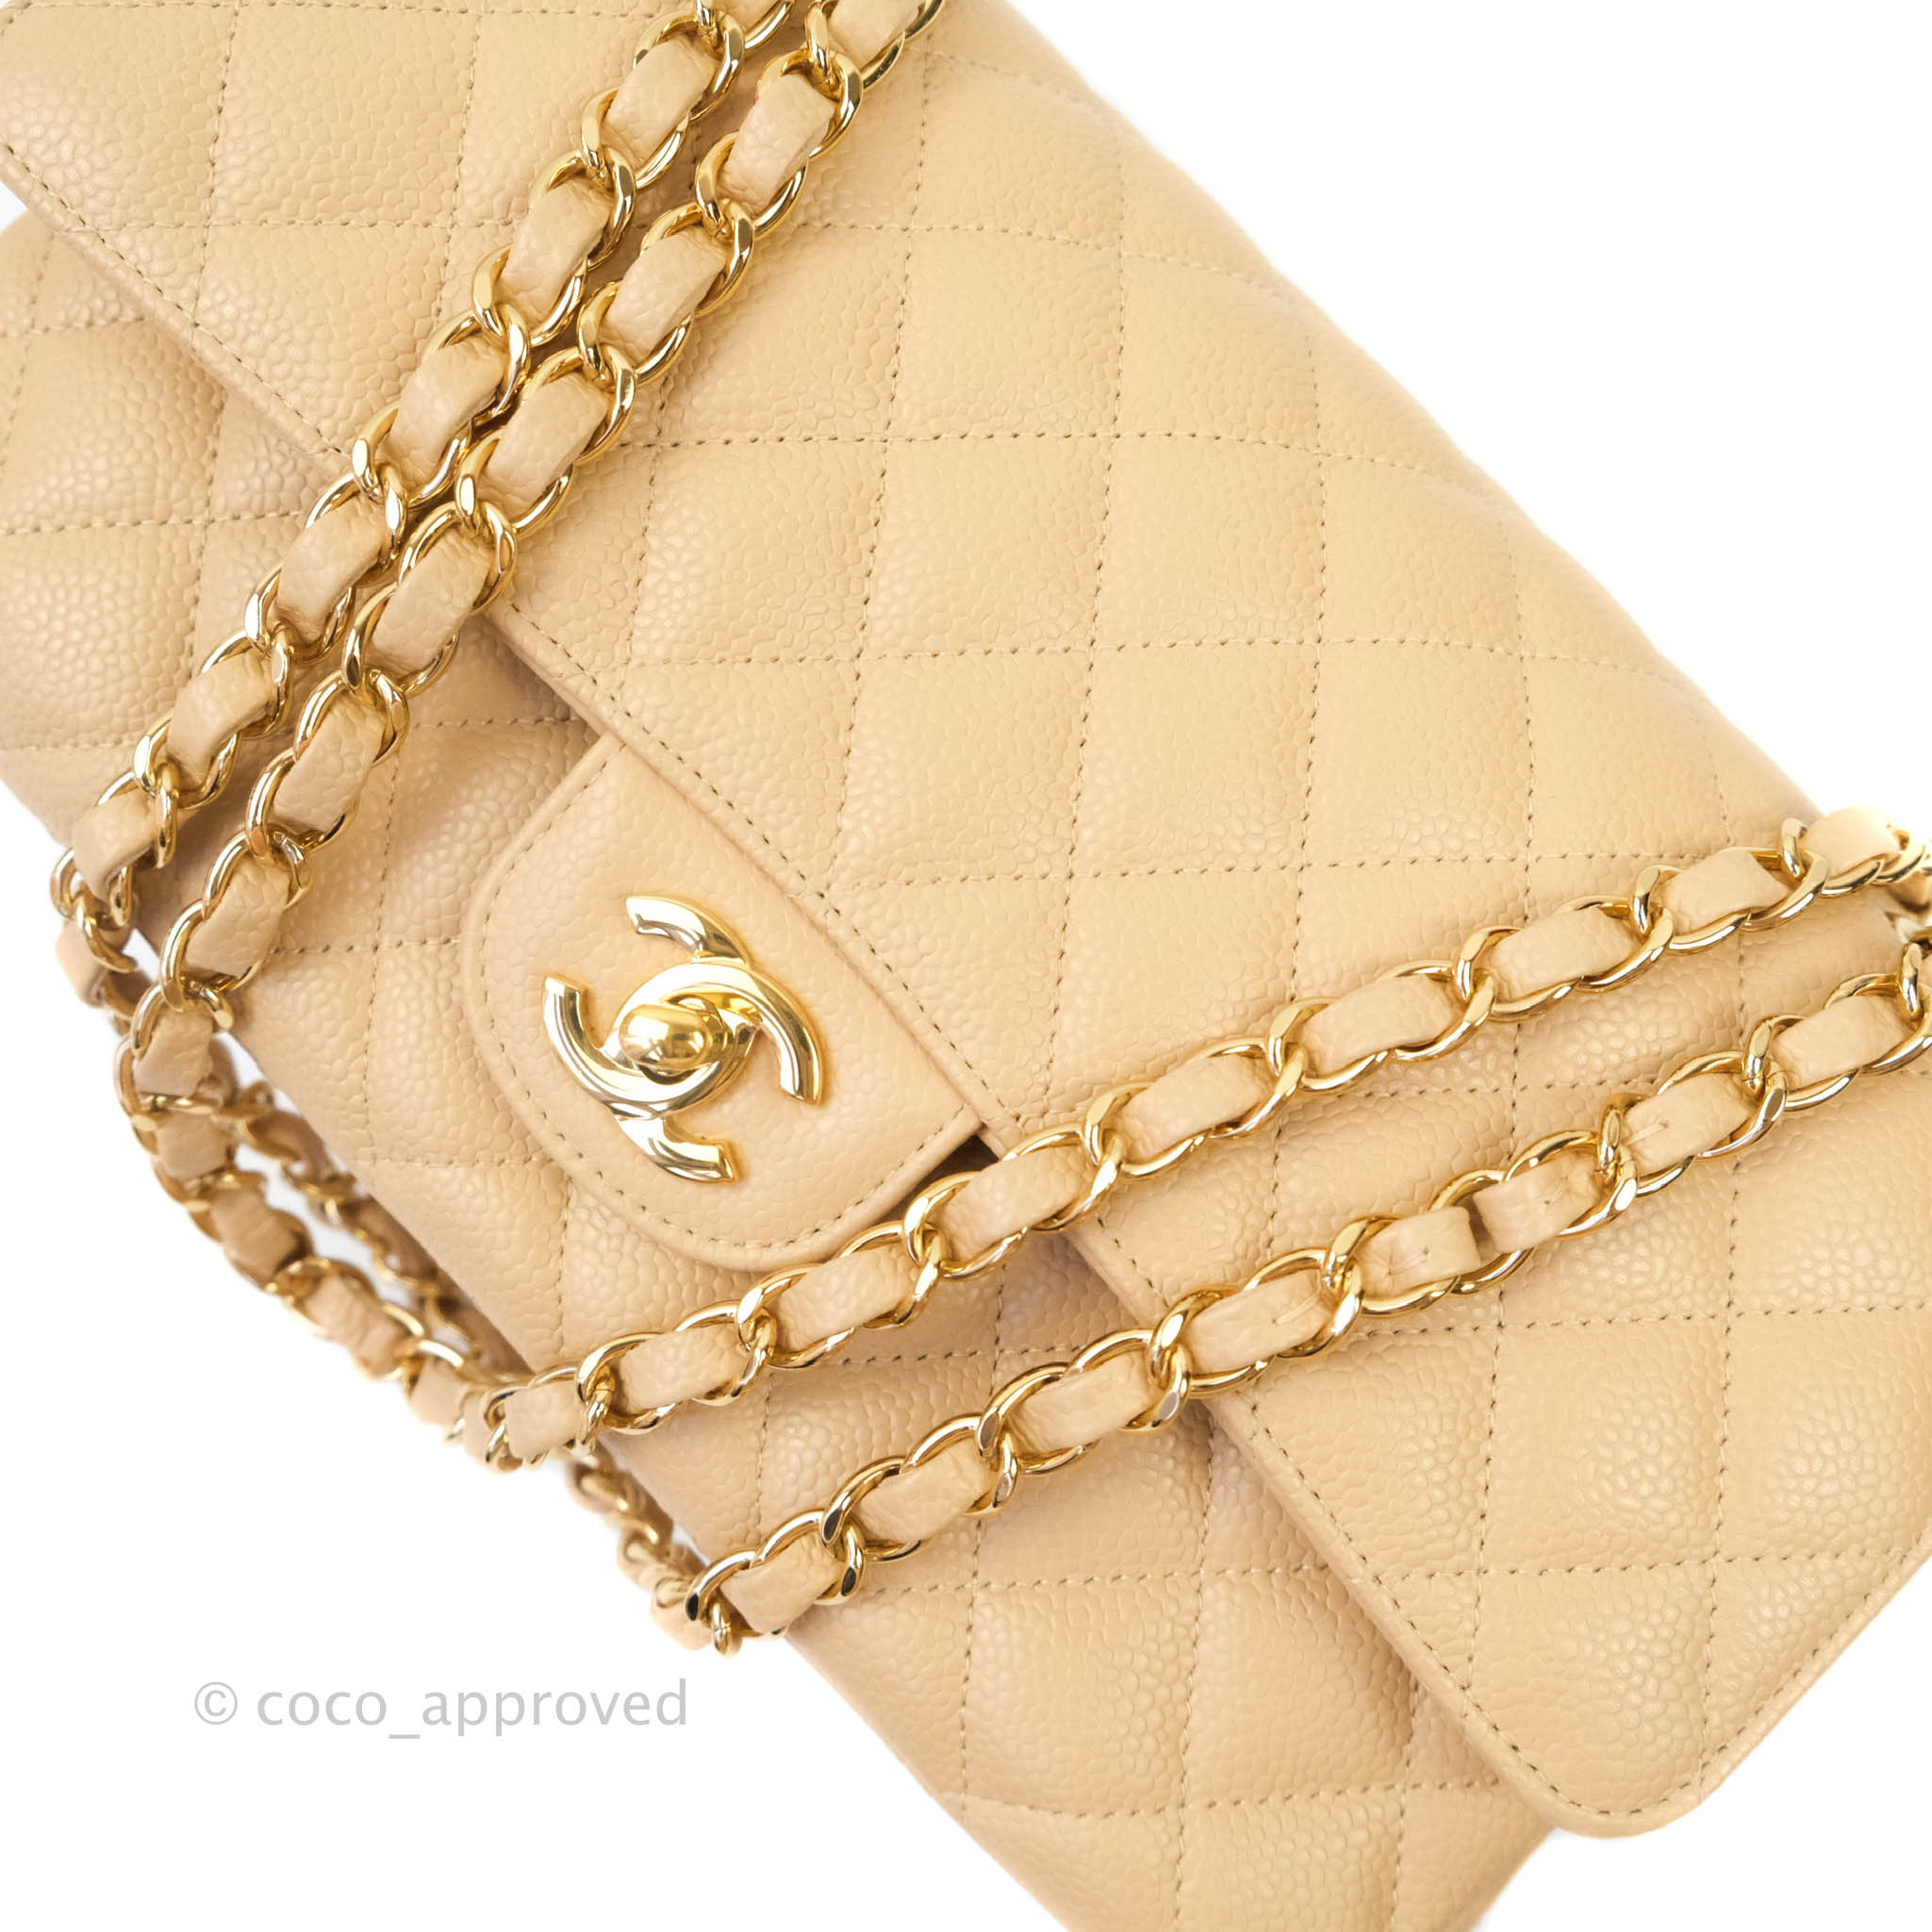 Chanel Vintage Beige Caviar Quilted 2.55 Small Classic Double Flap Bag